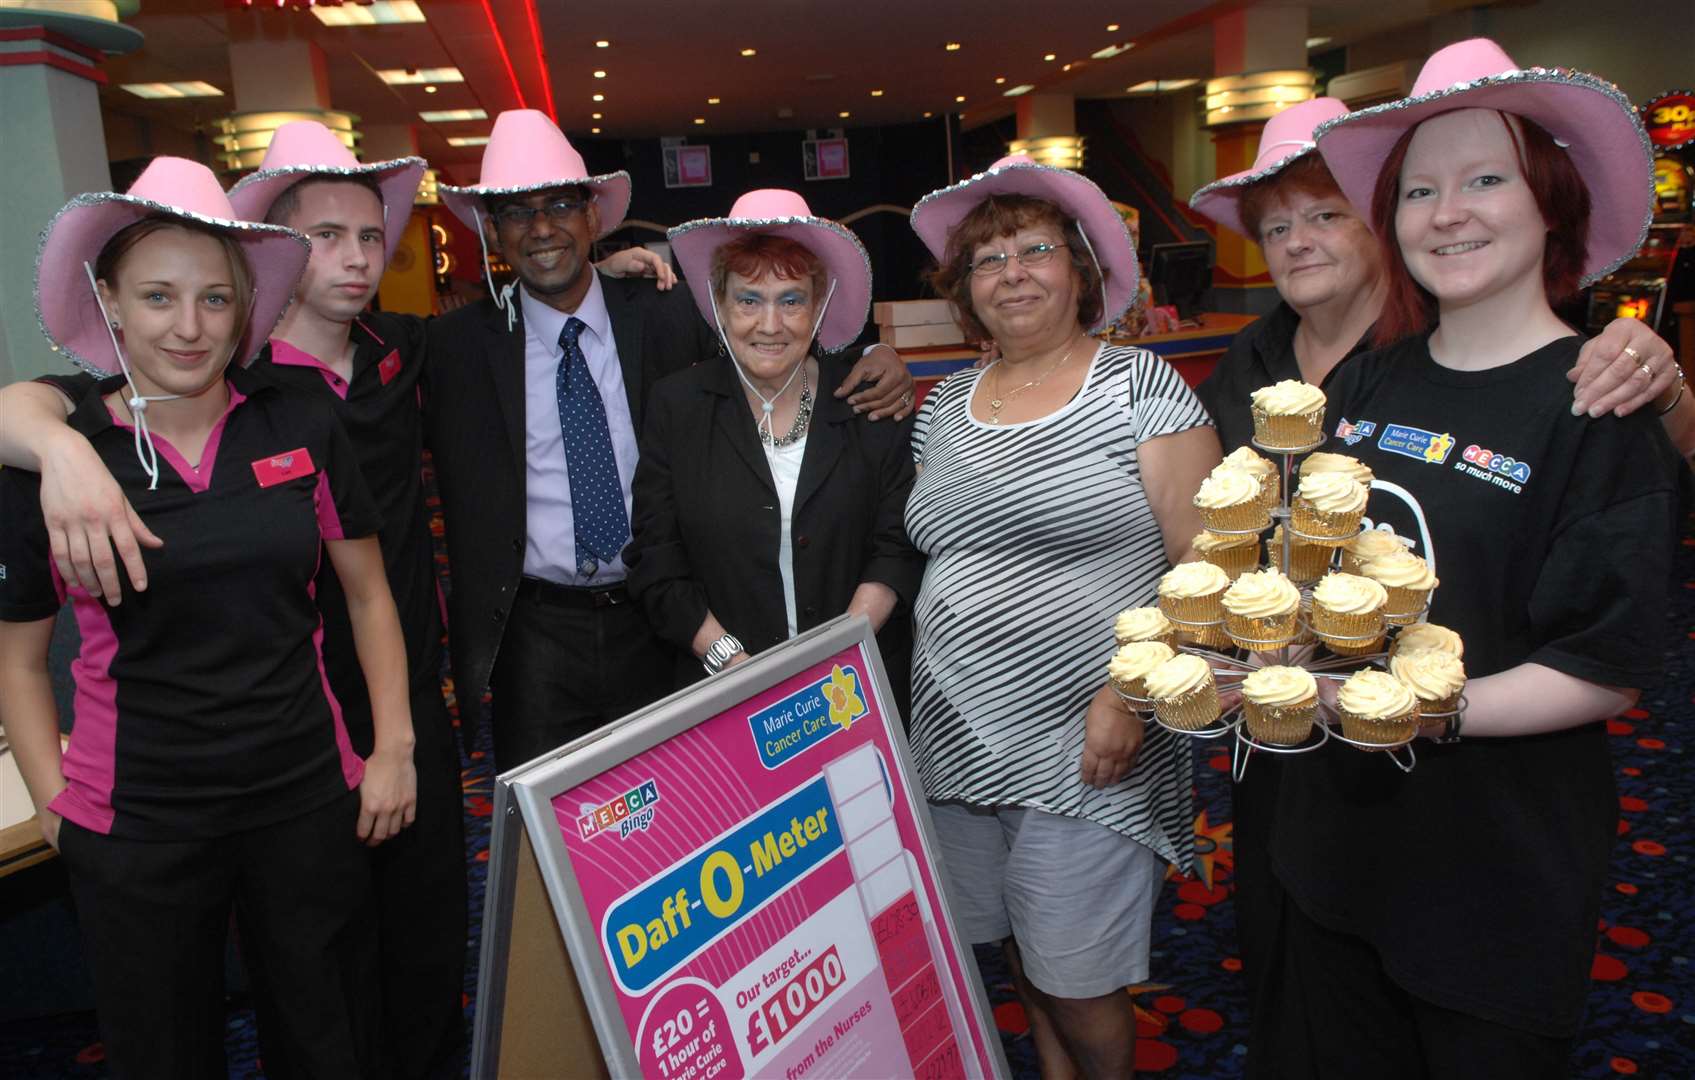 Staff and customers at a Mad Hatter's tea party in aid of Marie Curie in 2010